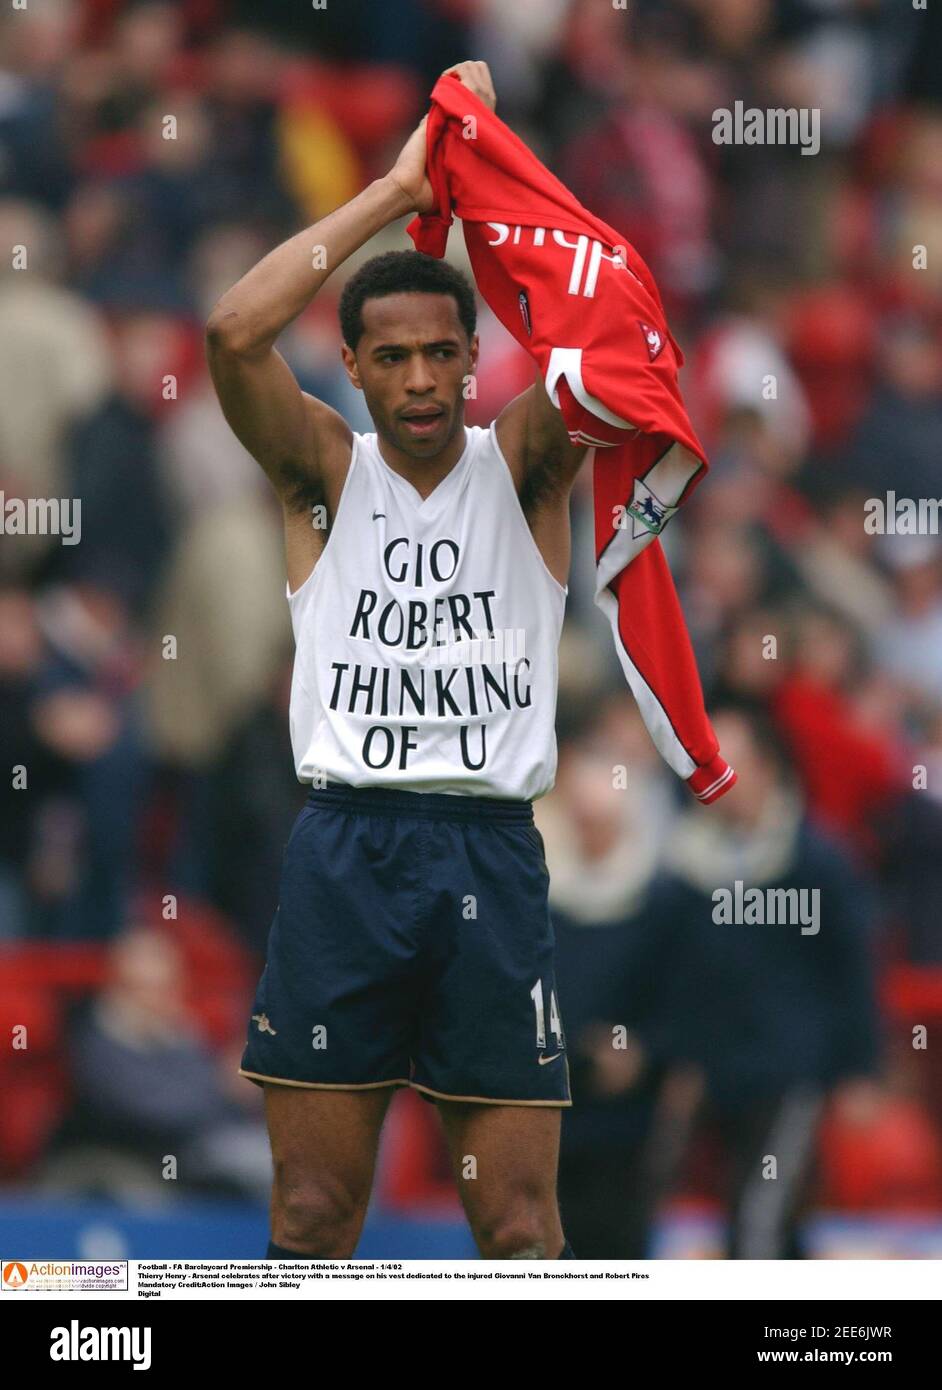 Football - FA Barclaycard Premiership - Charlton Athletic v Arsenal -  1/4/02 Thierry Henry - Arsenal celebrates after victory with a message on  his vest dedicated to the injured Giovanni Van Bronckhorst